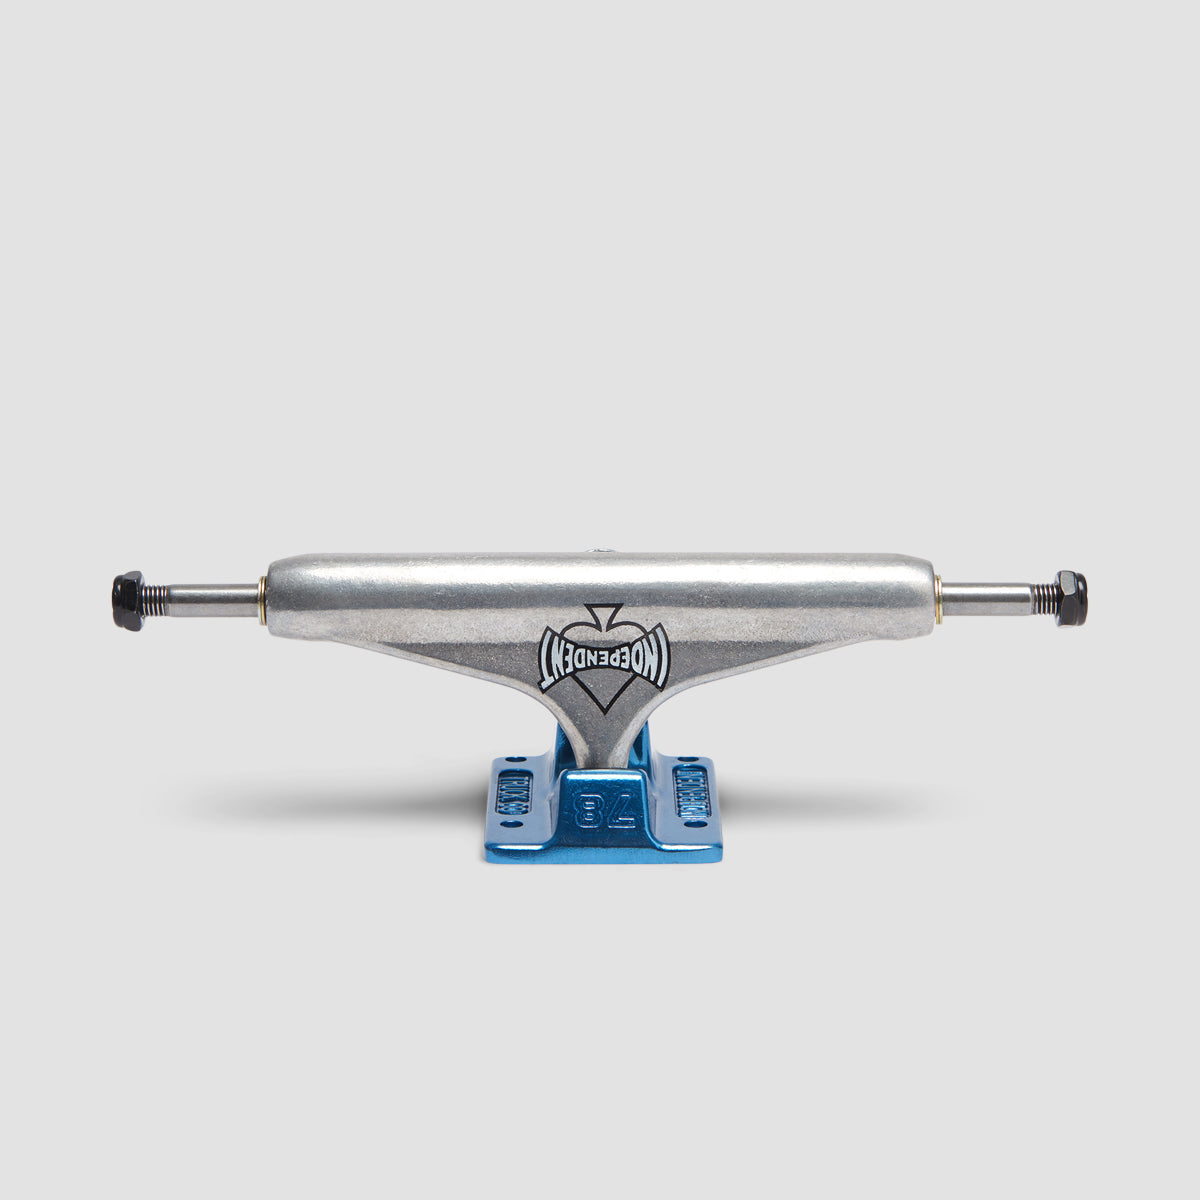 Independent Stage 11 144 Forged Hollow Cant Be Beat 78 Skateboard Trucks 1 Pair Silver/Blue - 8.25"